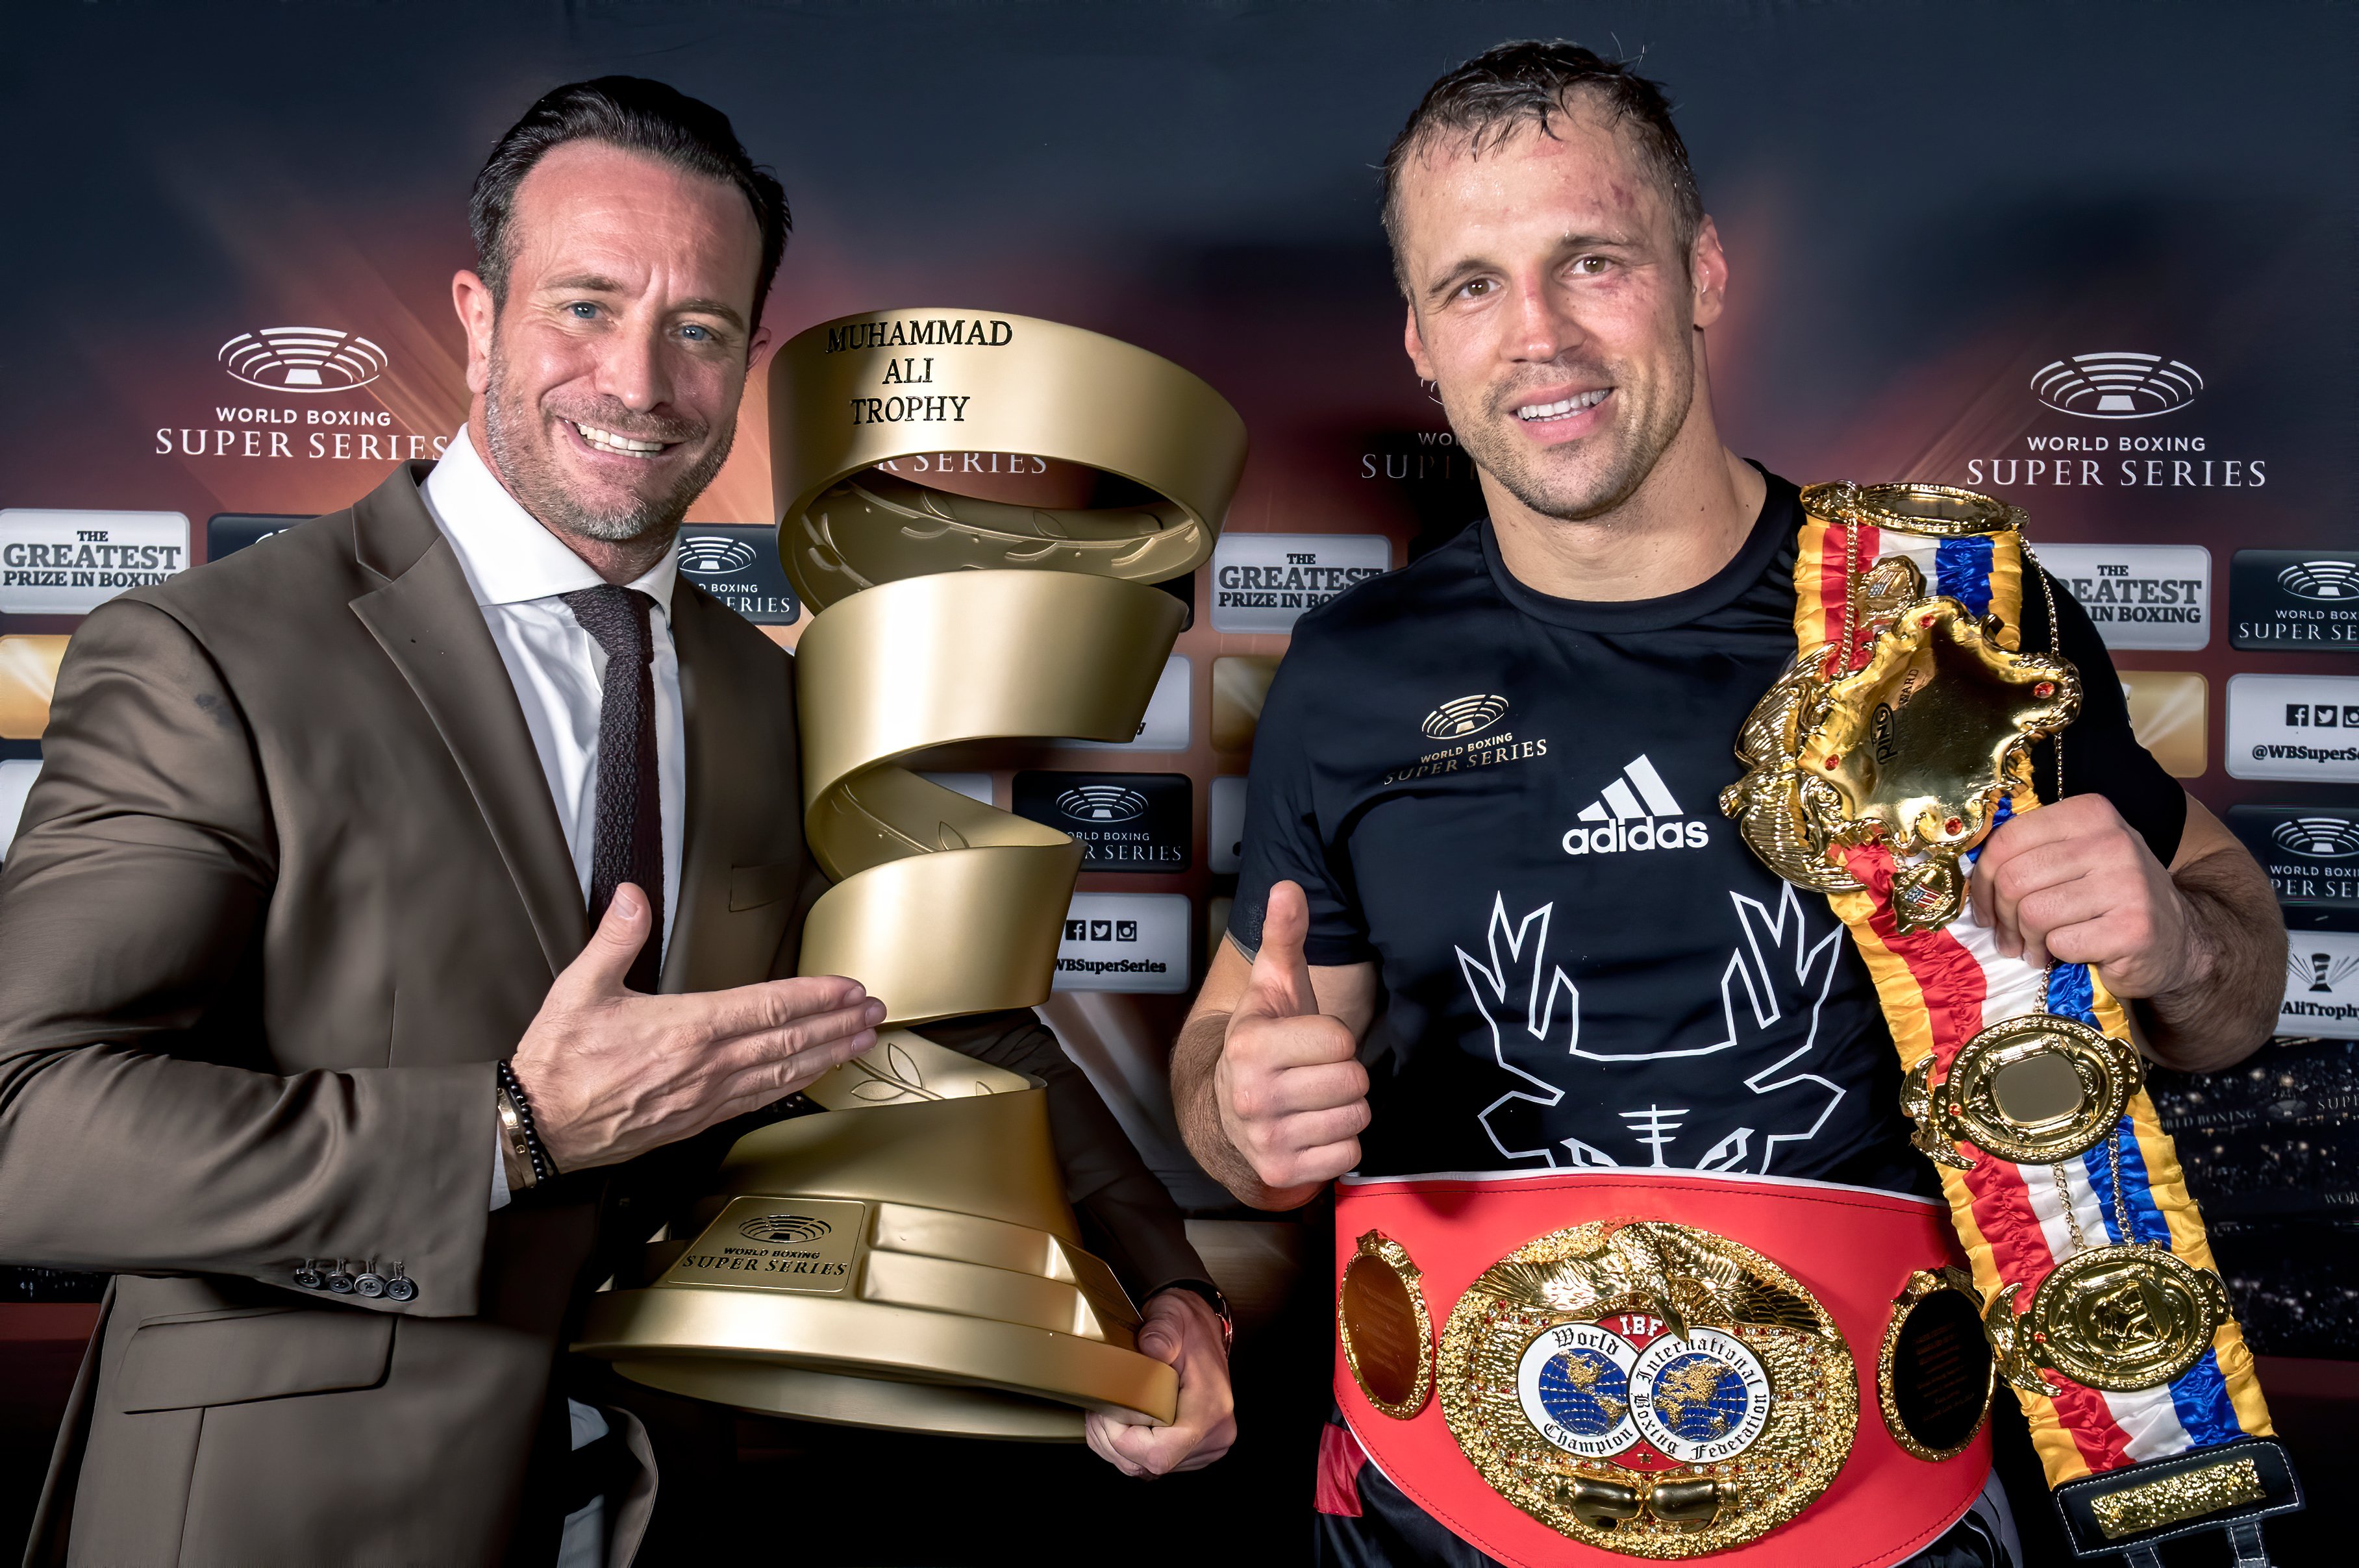 Sauerland expects Briedis to face Ramirez for vacant IBF cruiserweight title